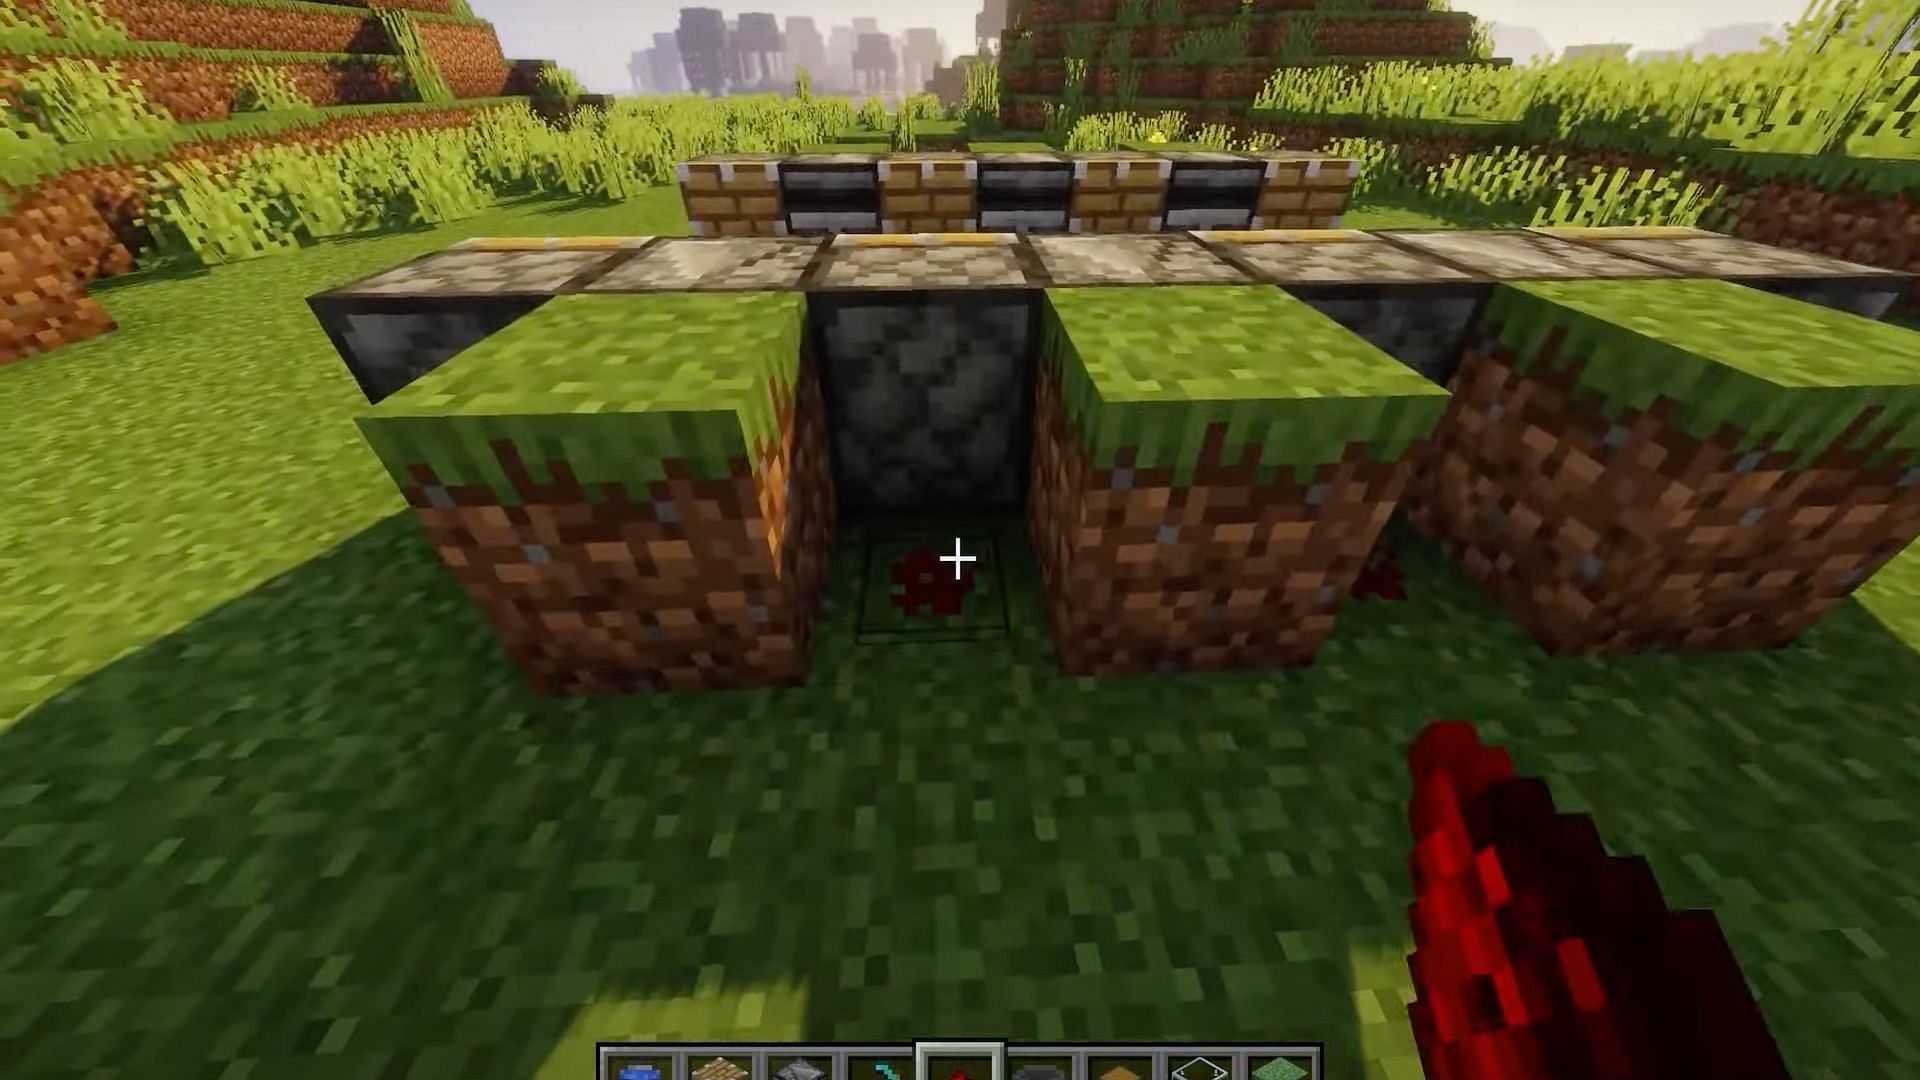 Redstone dust will help to power the automatic farm in Minecraft (Image via NaMiature/YouTube)